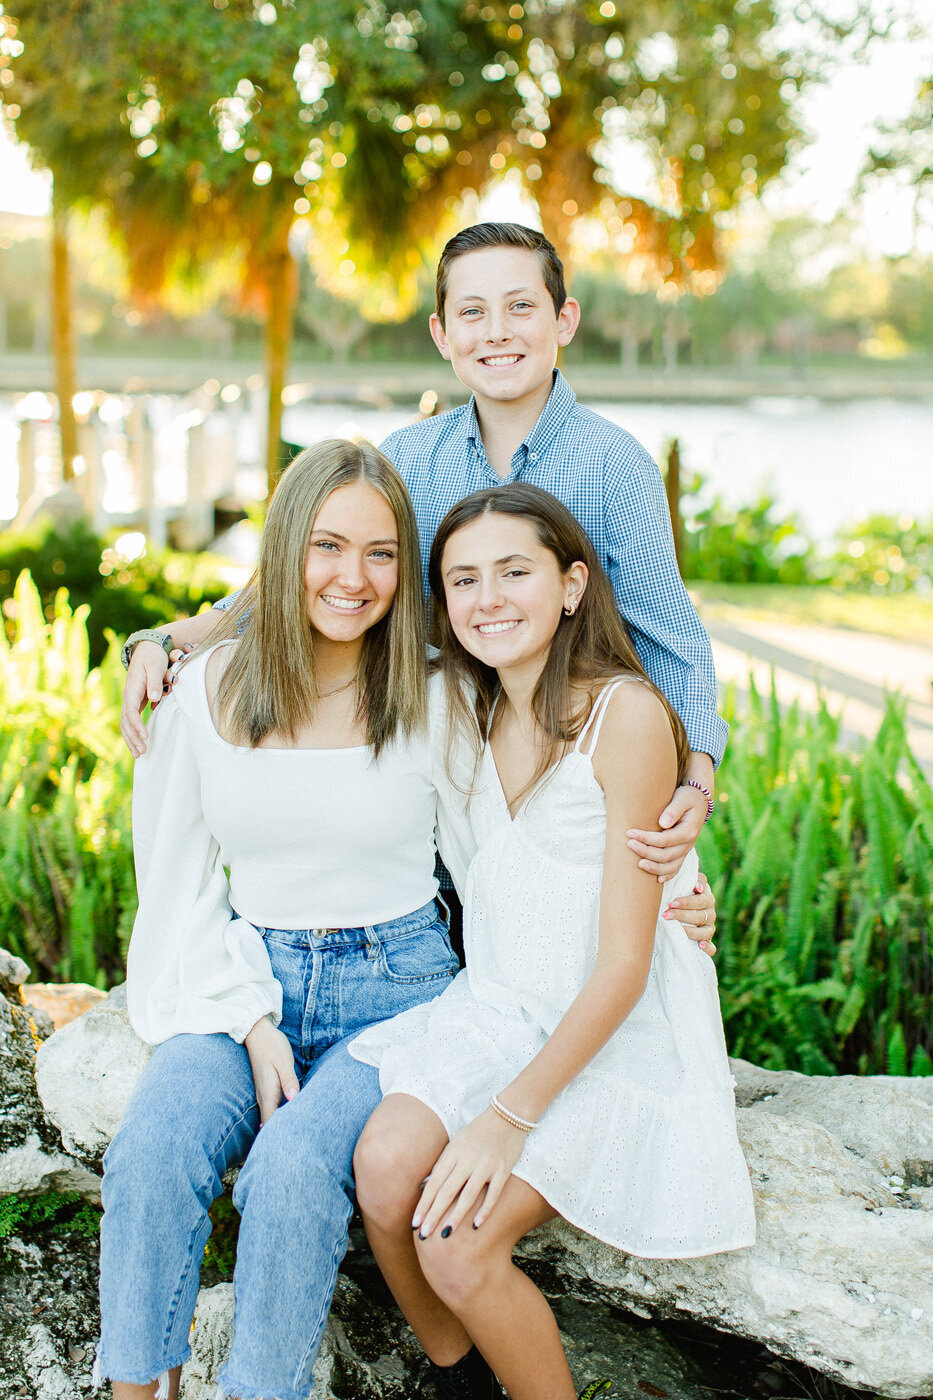 Tampa Family Photographer - Ailyn LaTorre 07